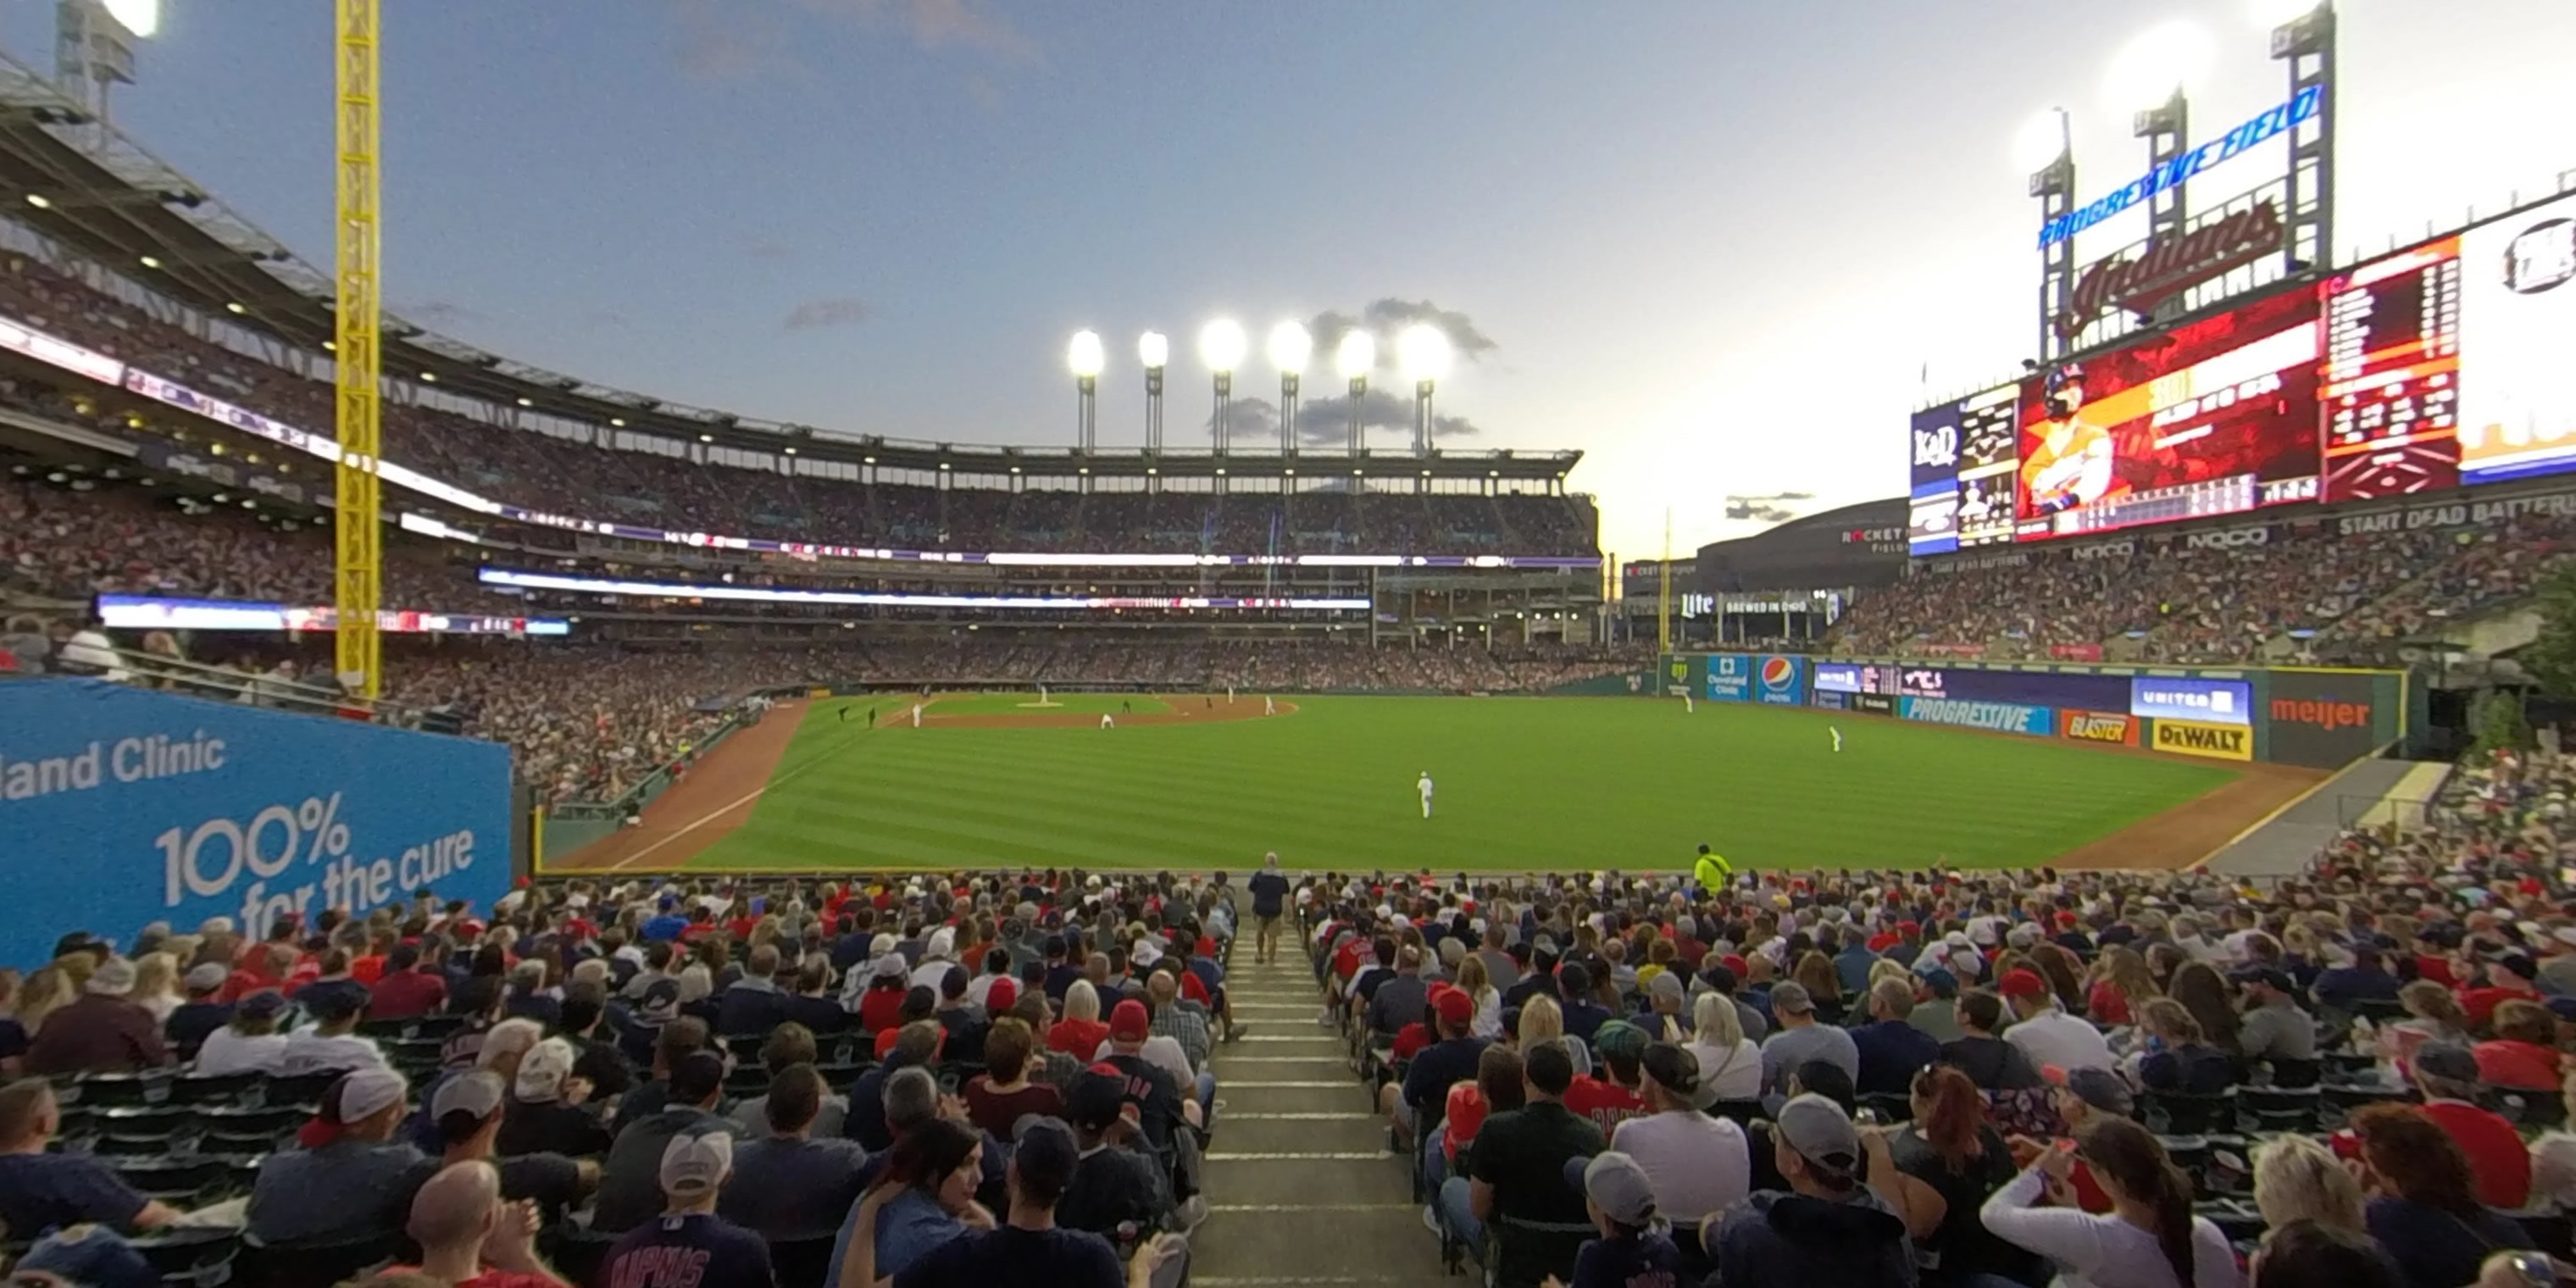 section 111 panoramic seat view  - progressive field